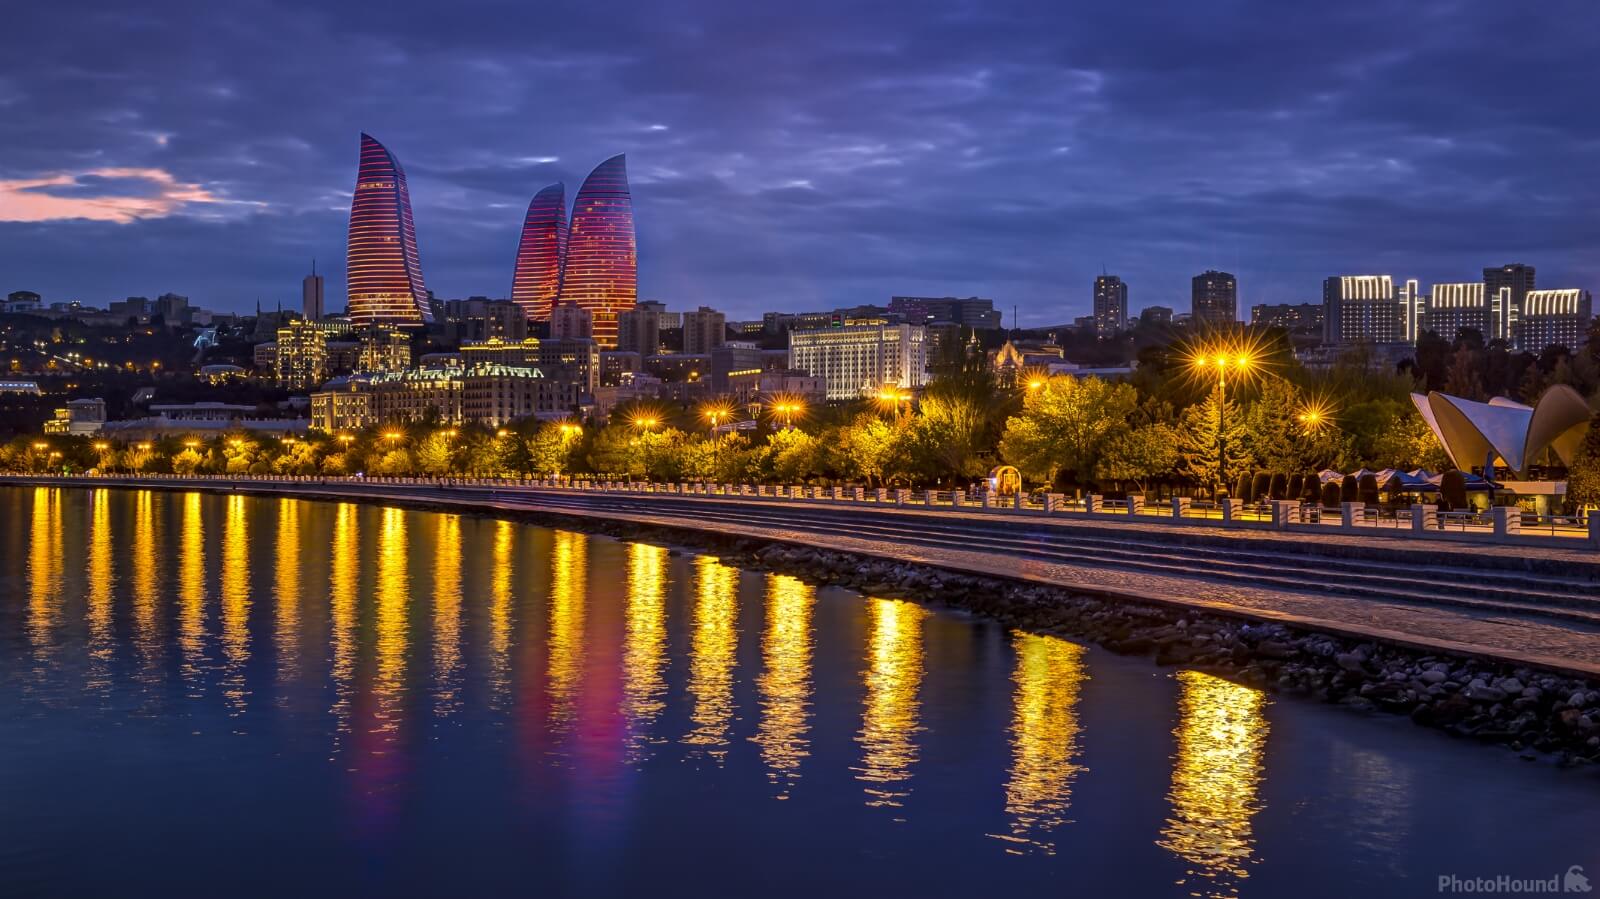 Image of Flame Towers - Waterfront Viewpoint by Adelheid Smitt